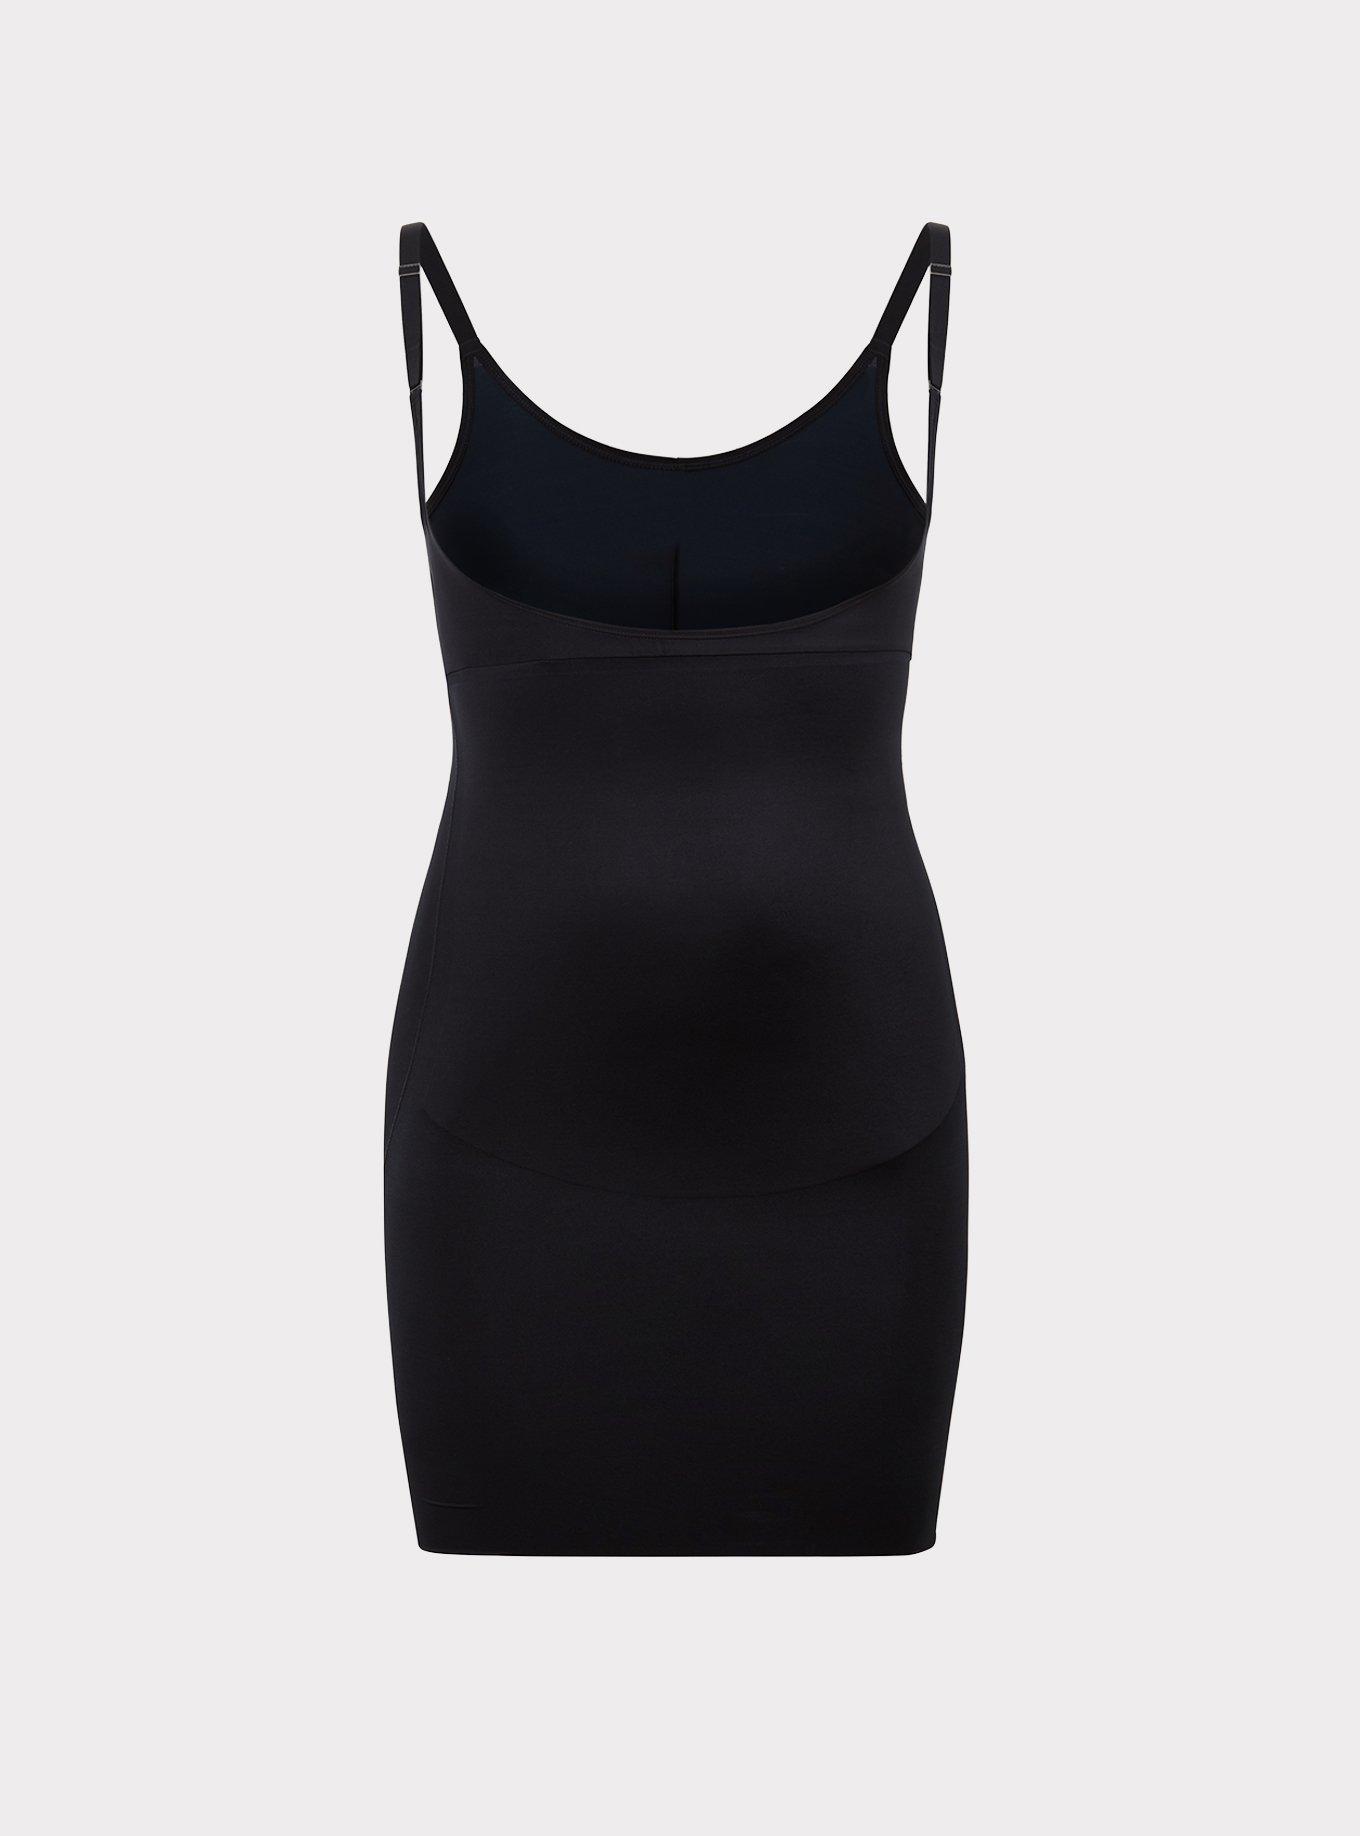 Spanx New! SmartGrip™ Open-Bust Full Slip Black Size XS - $38 New With Tags  - From Meghan